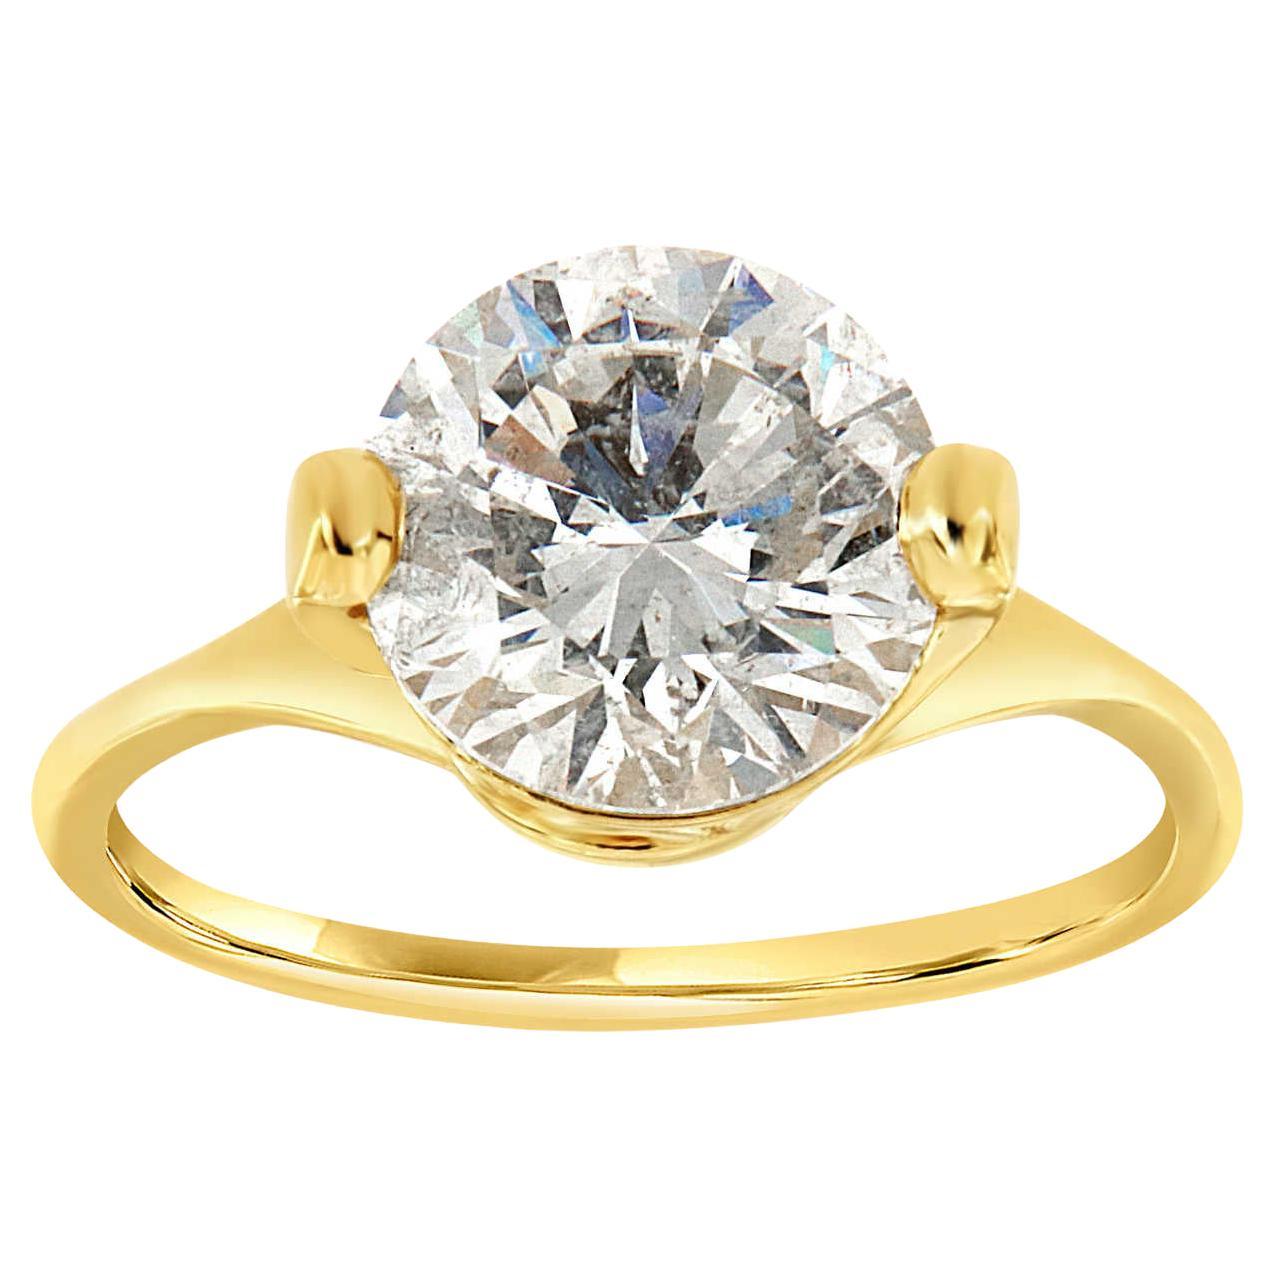 EGL USA Certified 3.01 Carat Round Diamond 14K Yellow Gold Solitaire Ring